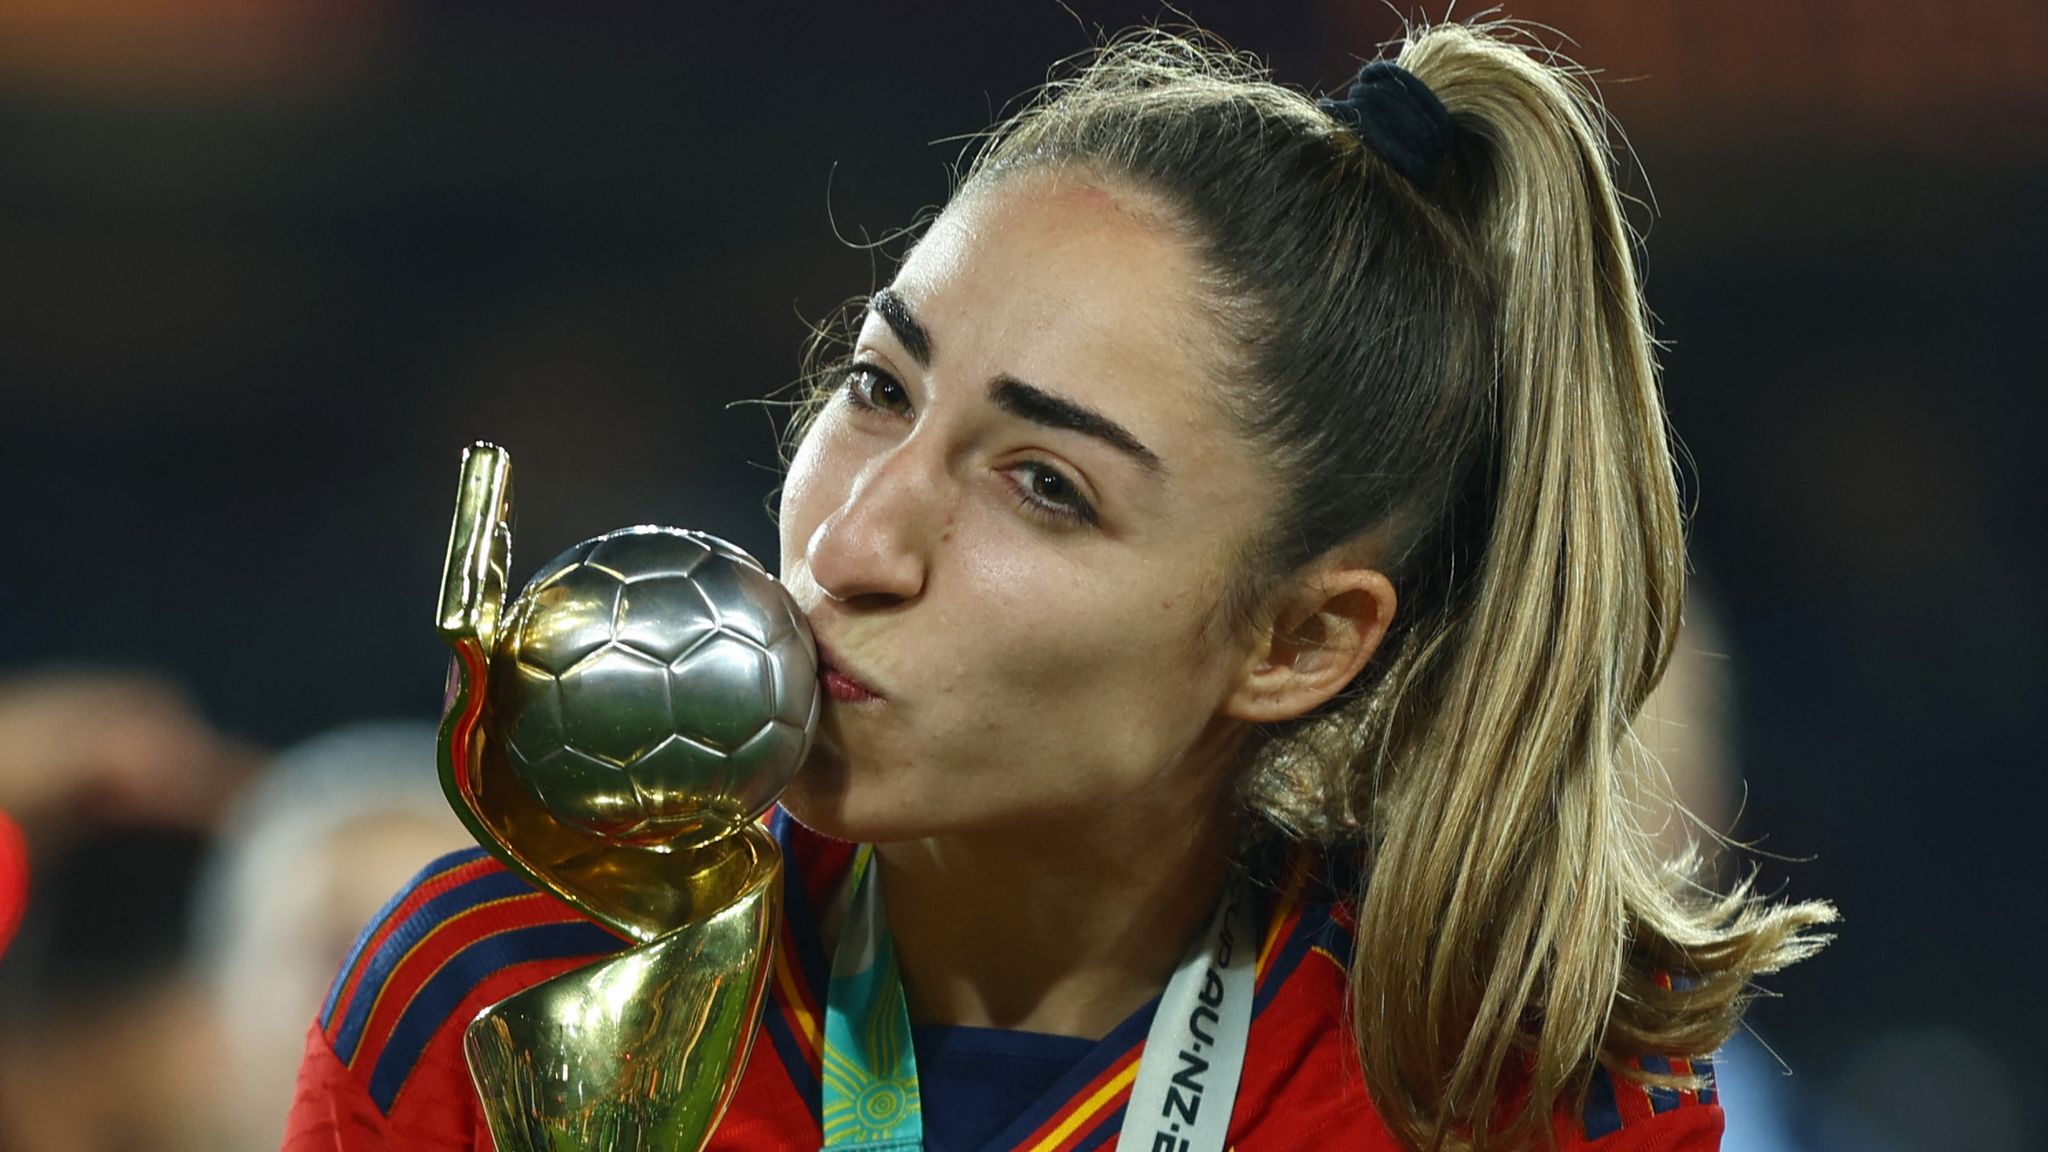 Spain's Olga Carmona shows message on shirt during World Cup win